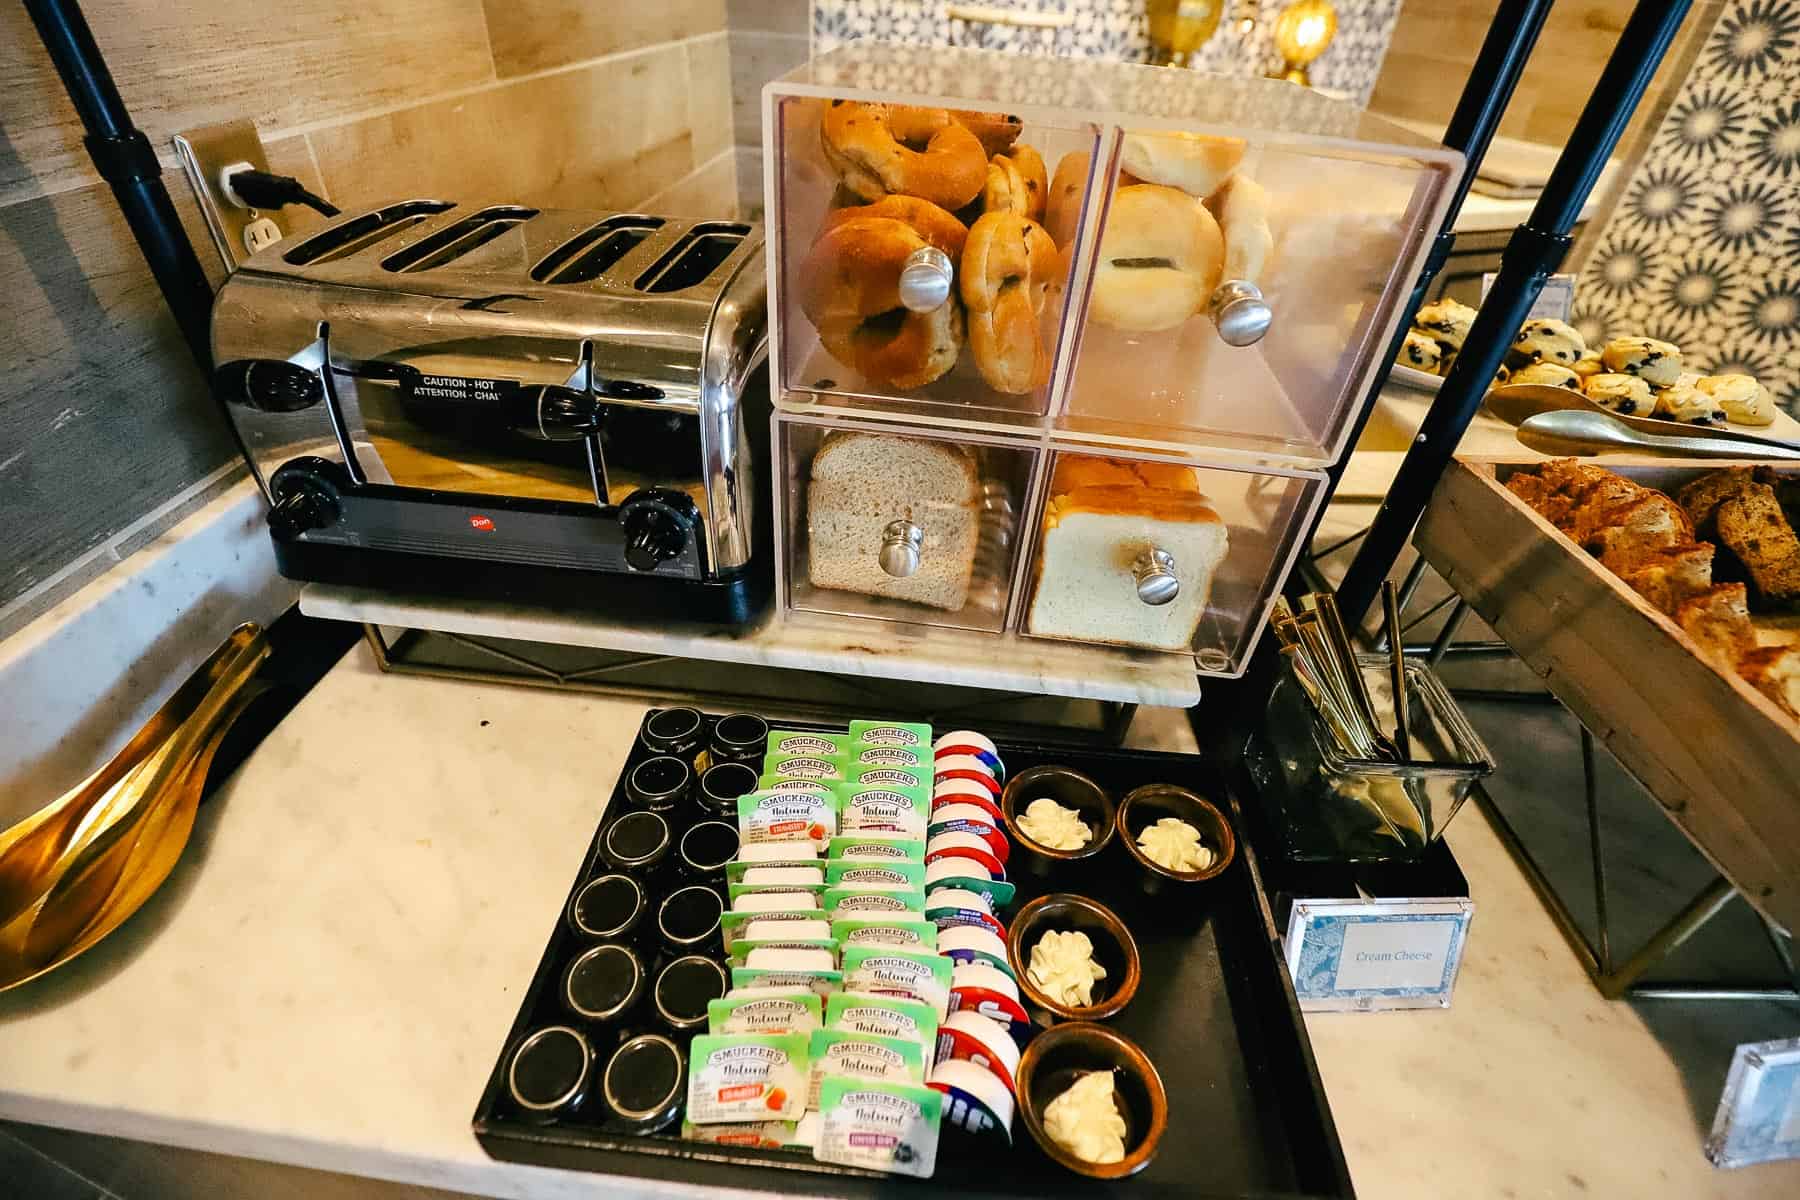 Bread box with bagels, sliced bread, and a toaster oven in the Chronos Club 